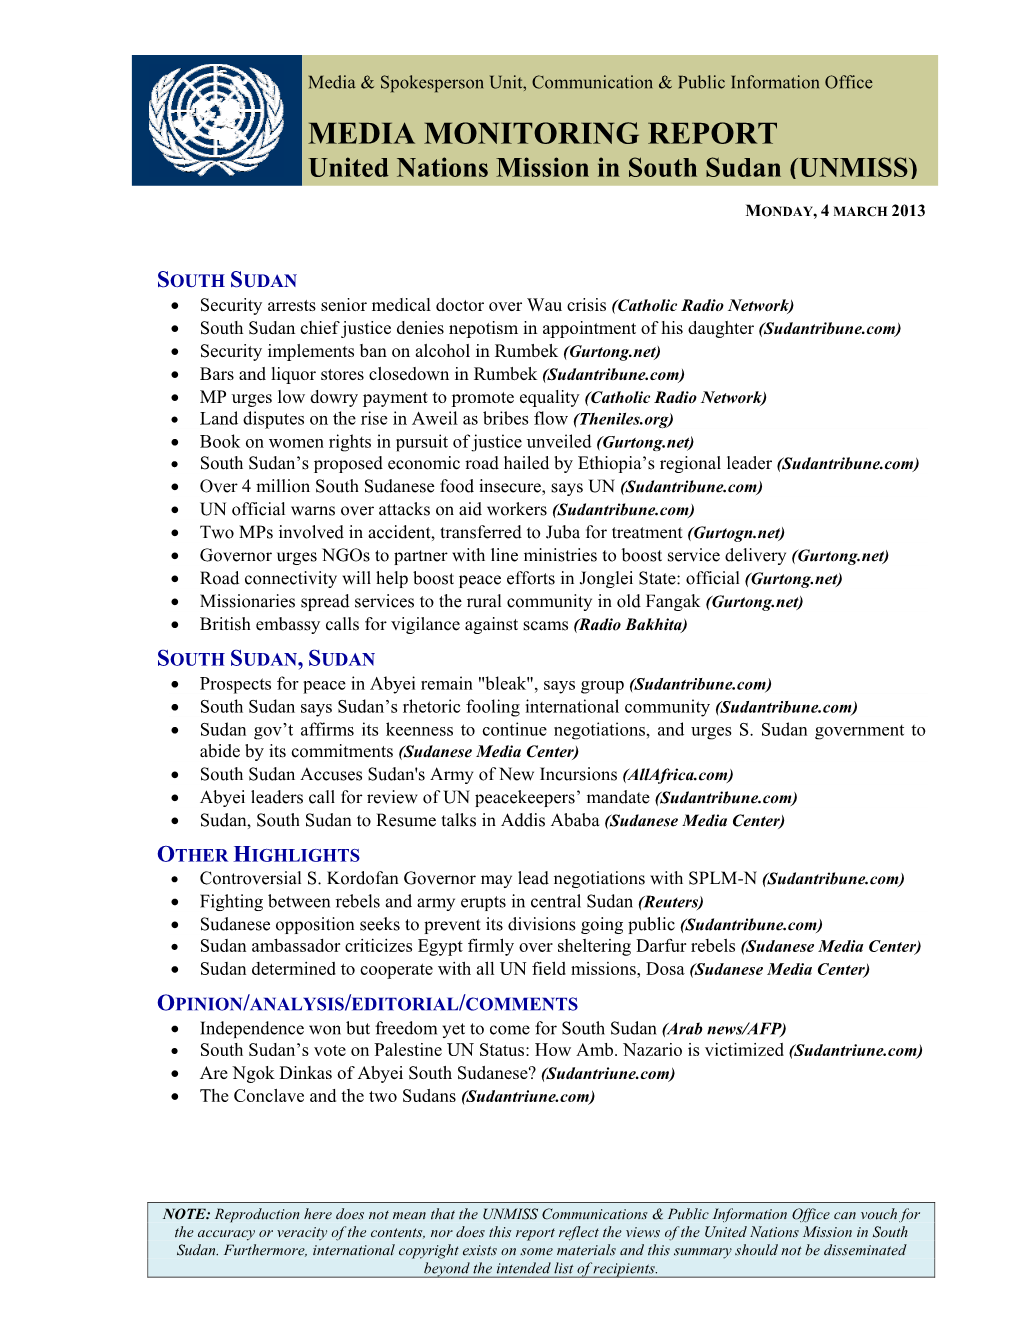 MEDIA MONITORING REPORT United Nations Mission in South Sudan (UNMISS)